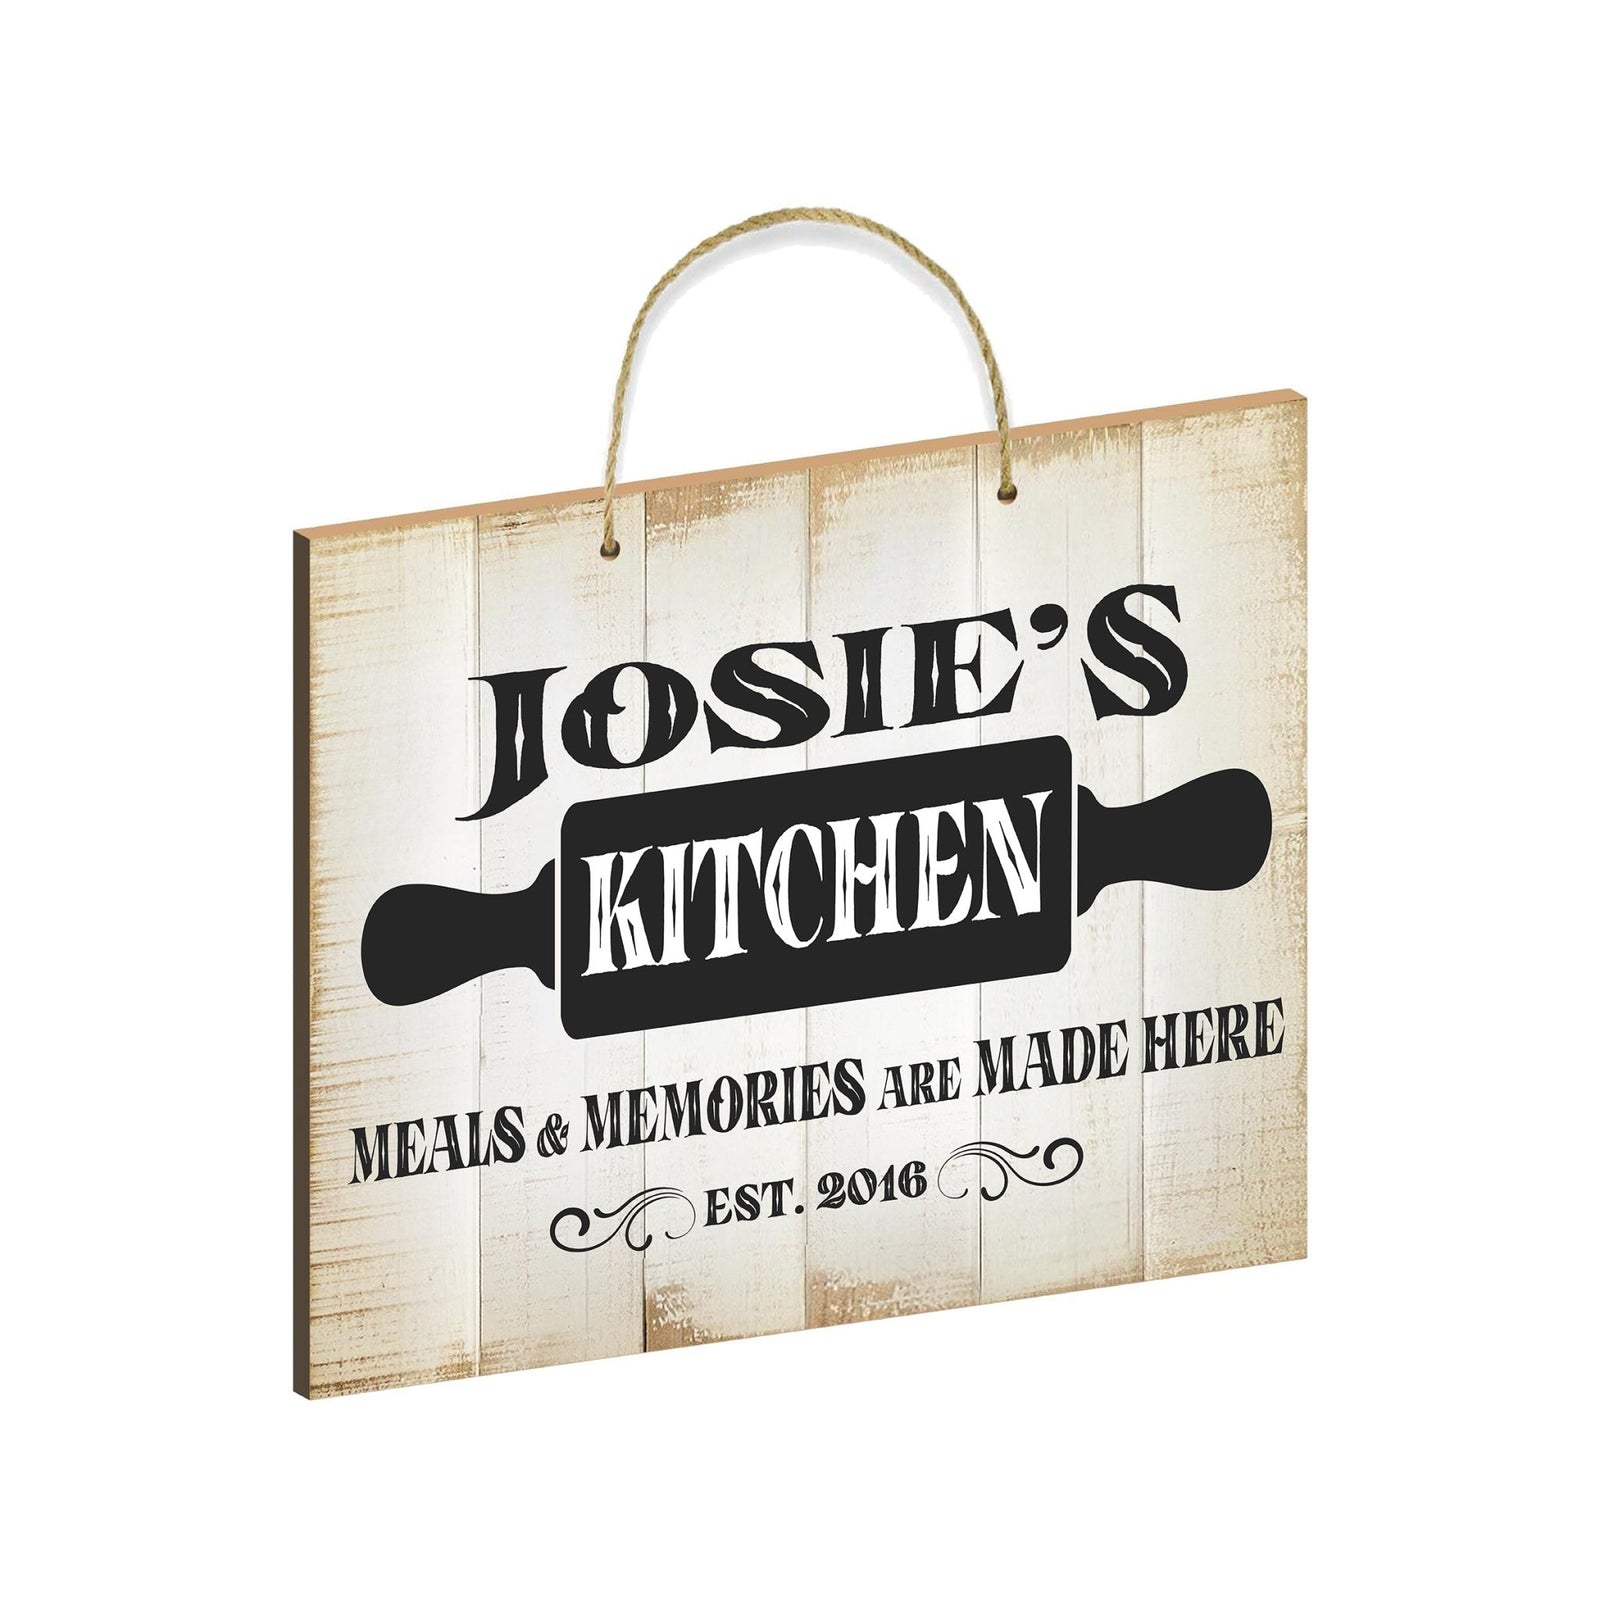 Rustic-Inspired Wooden Wall Hanging Rope Sign For Kitchen & Home Décor - Meals & Memories